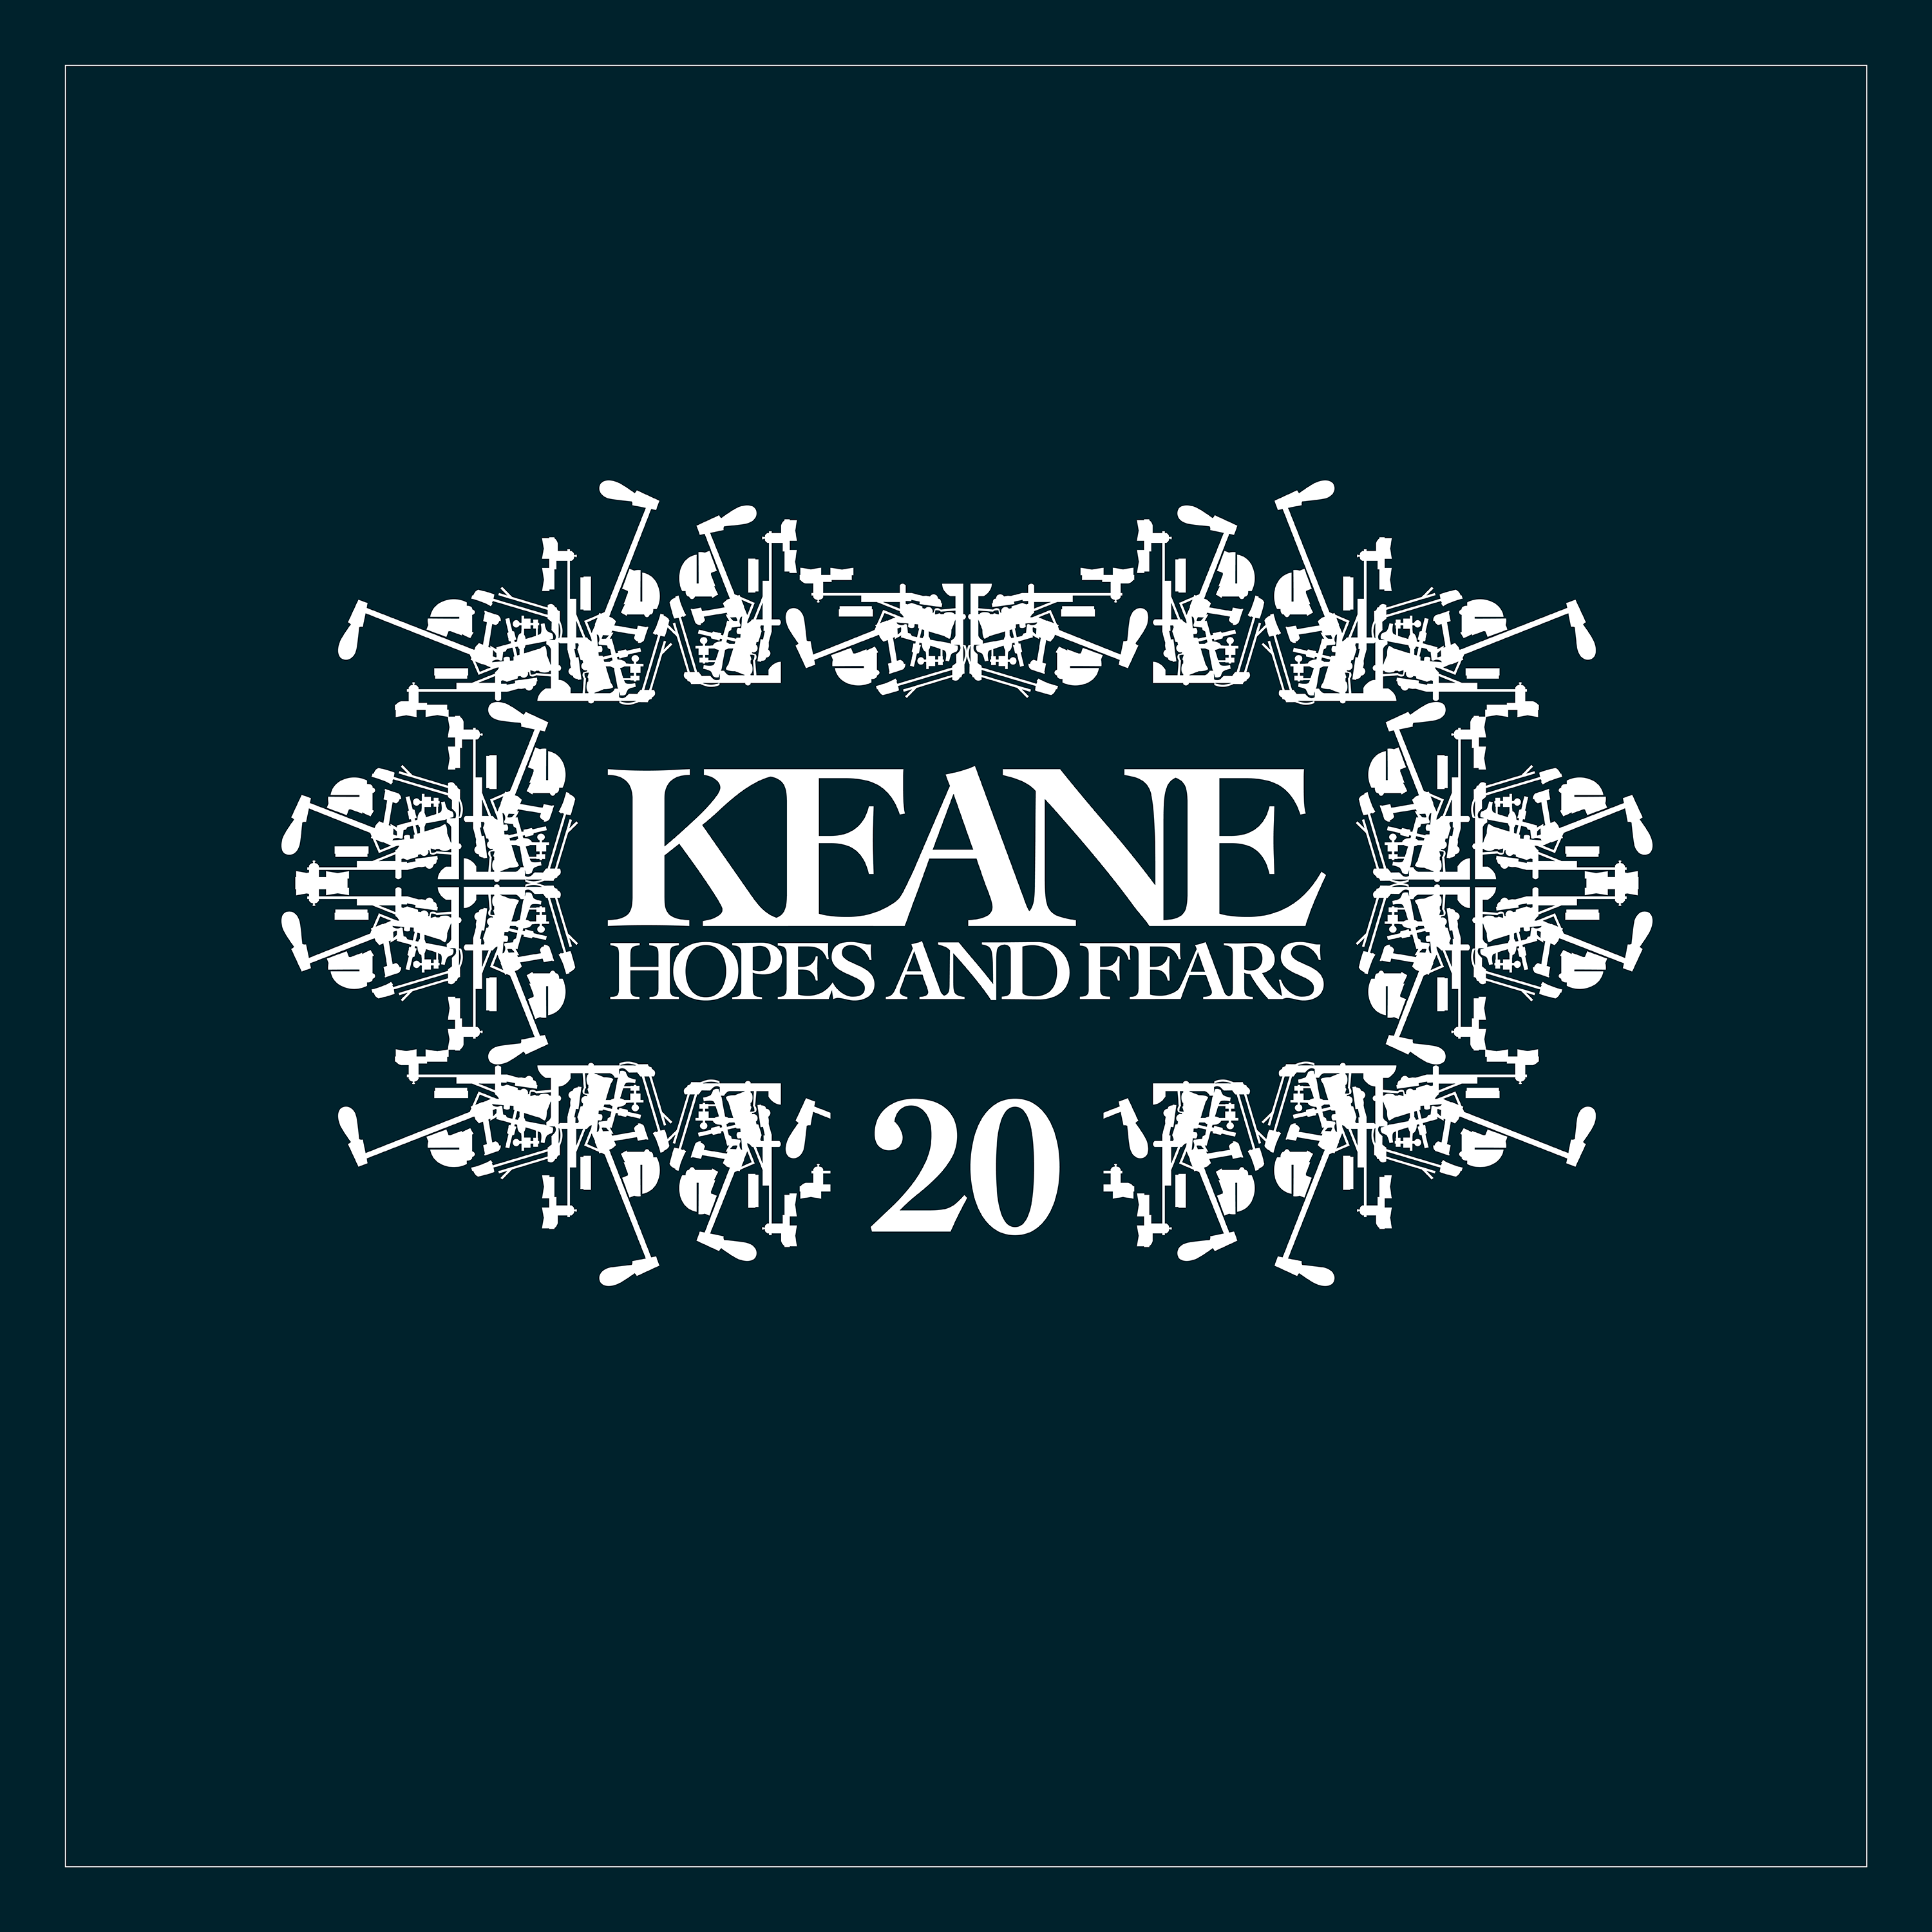 Keane - 20th Anniversary Hopes and Fears Limited 2LP Colour Vinyl -  uDiscover